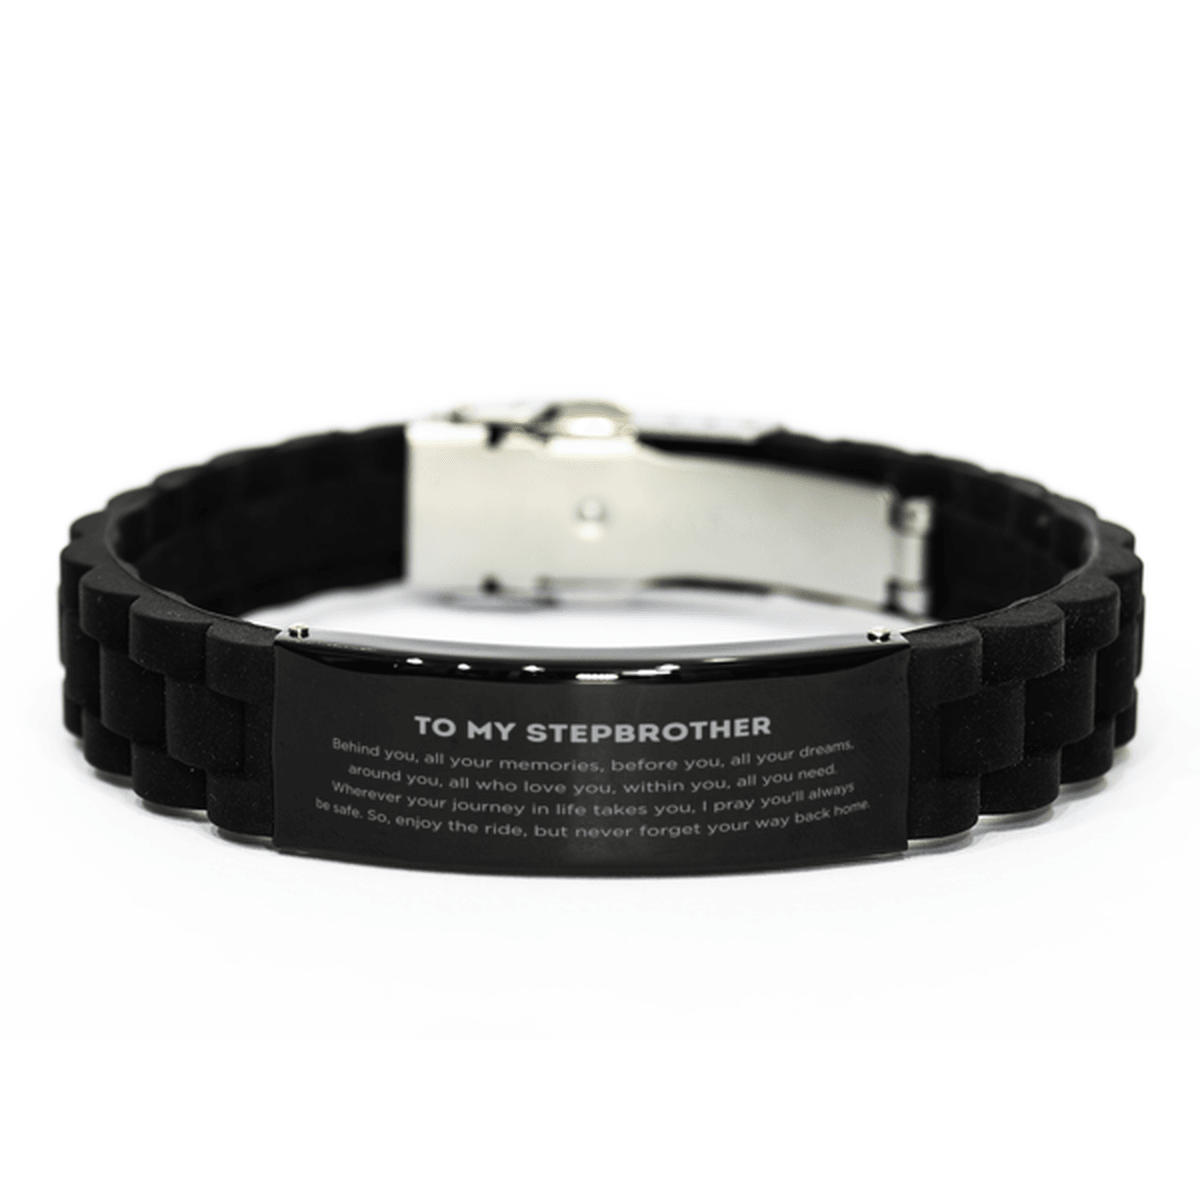 To My Stepbrother Gifts, Inspirational Stepbrother Black Glidelock Clasp Bracelet, Sentimental Birthday Christmas Unique Gifts For Stepbrother Behind you, all your memories, before you, all your dreams, around you, all who love you, within you, all you ne - Mallard Moon Gift Shop